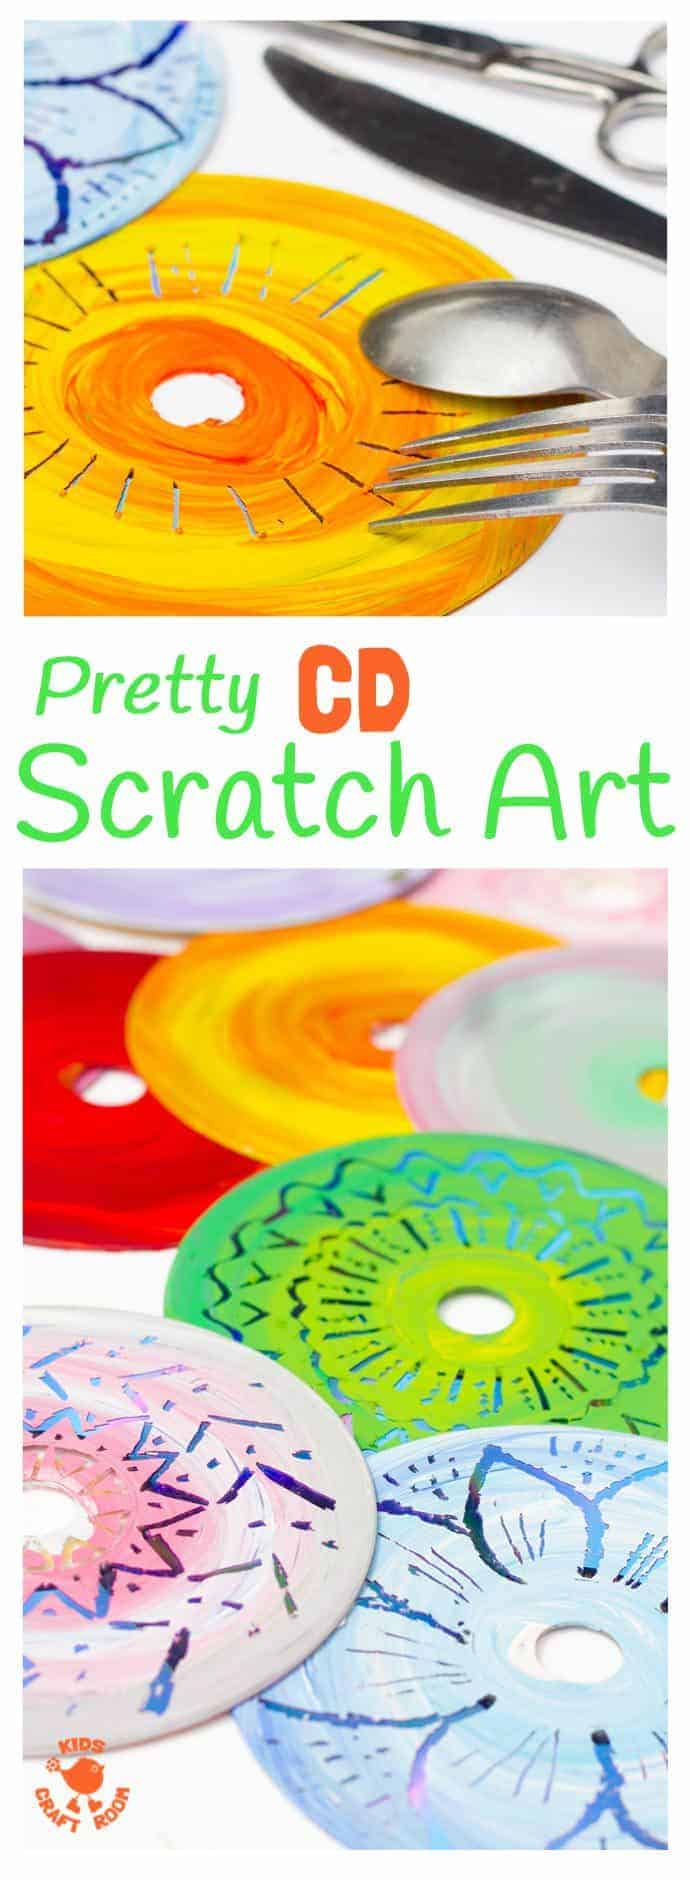 CD SCRATCH ART - Kids can have loads of fun with old CDs making vibrant Colourful CD Scratch Art. It's a fabulous recycled craft and process art opportunity for kids of all ages.